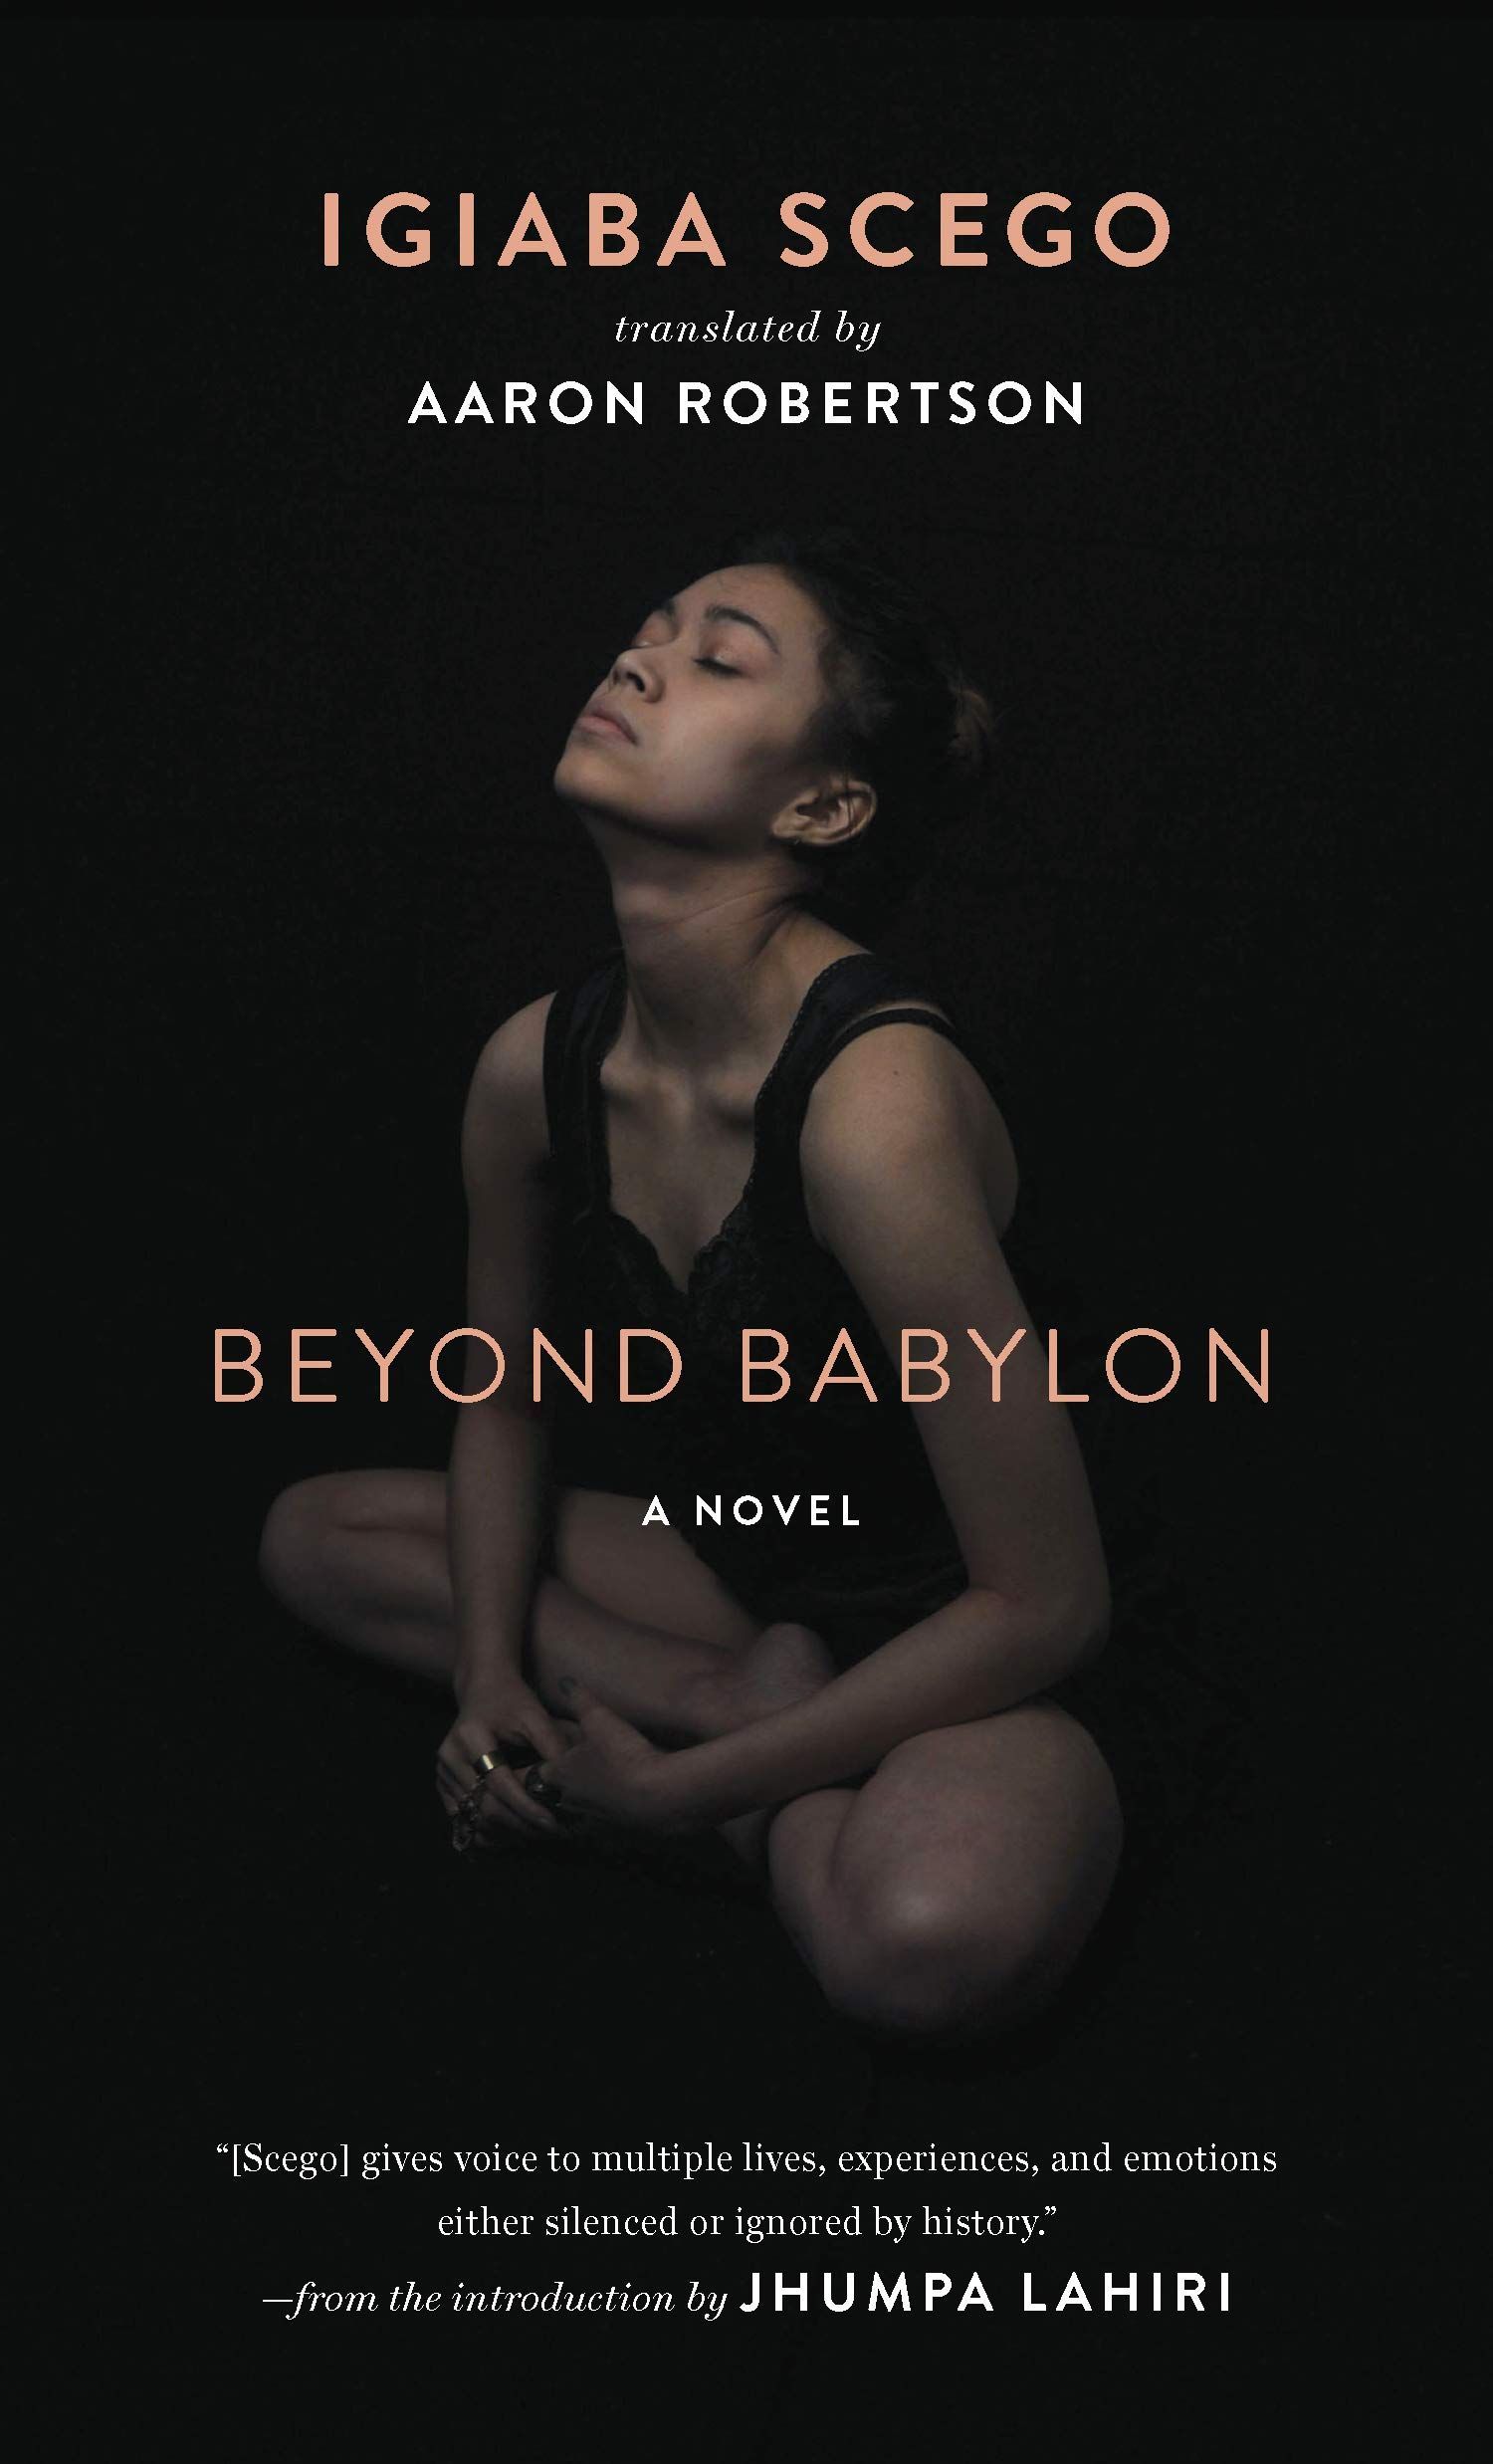 Fractured and Fluid Identity: On Igiaba Scego’s “Beyond Babylon”